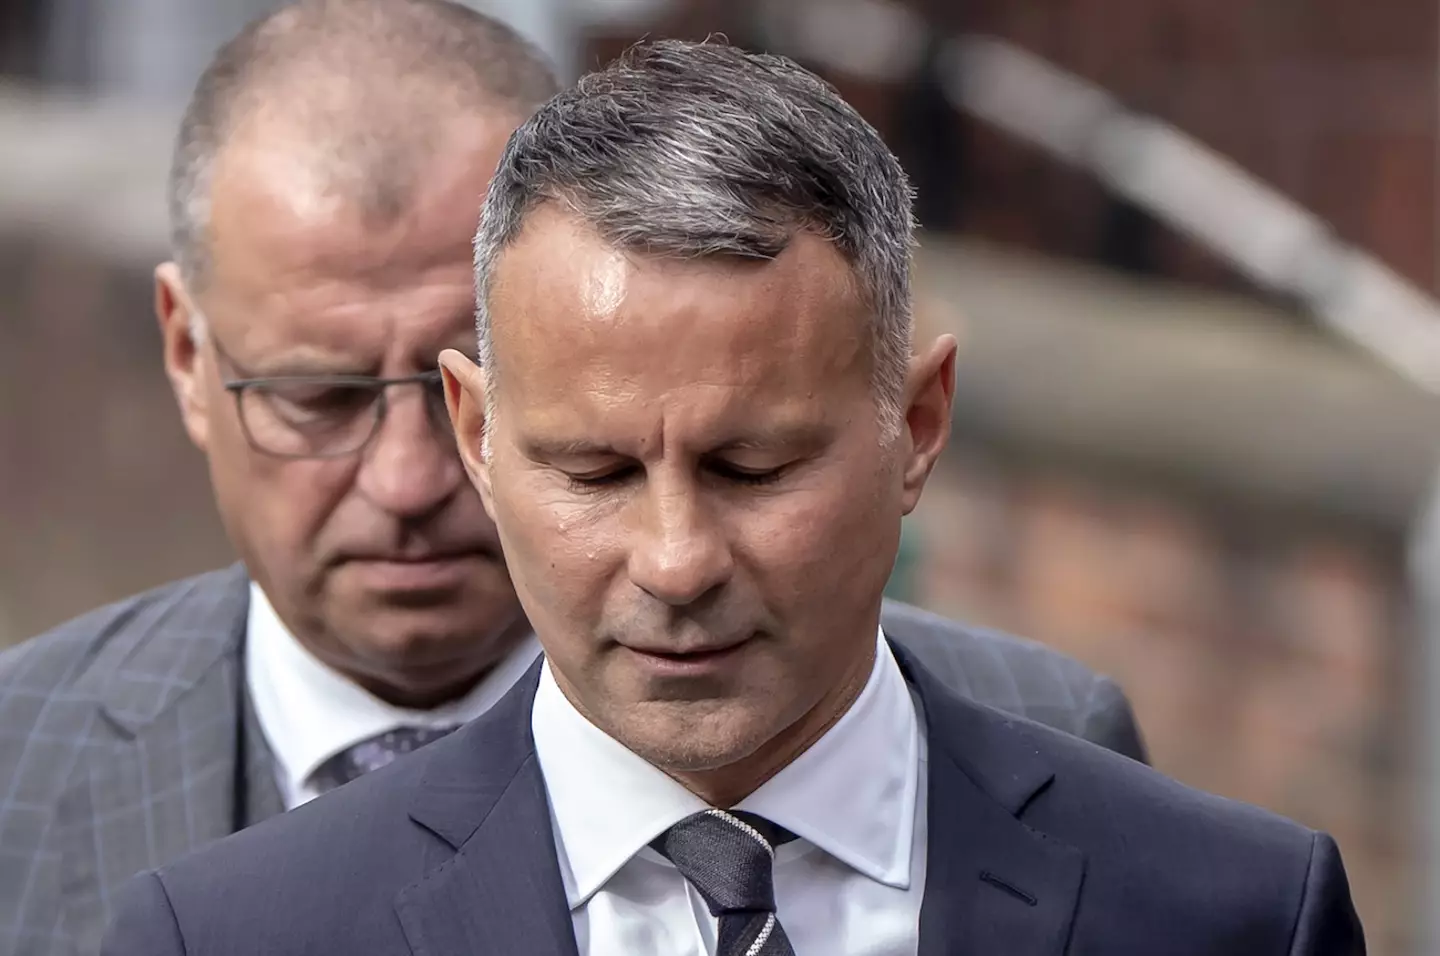 Ryan Giggs has now been cleared of controlling and coercive behaviour, assault occasioning actual bodily harm and common assault.